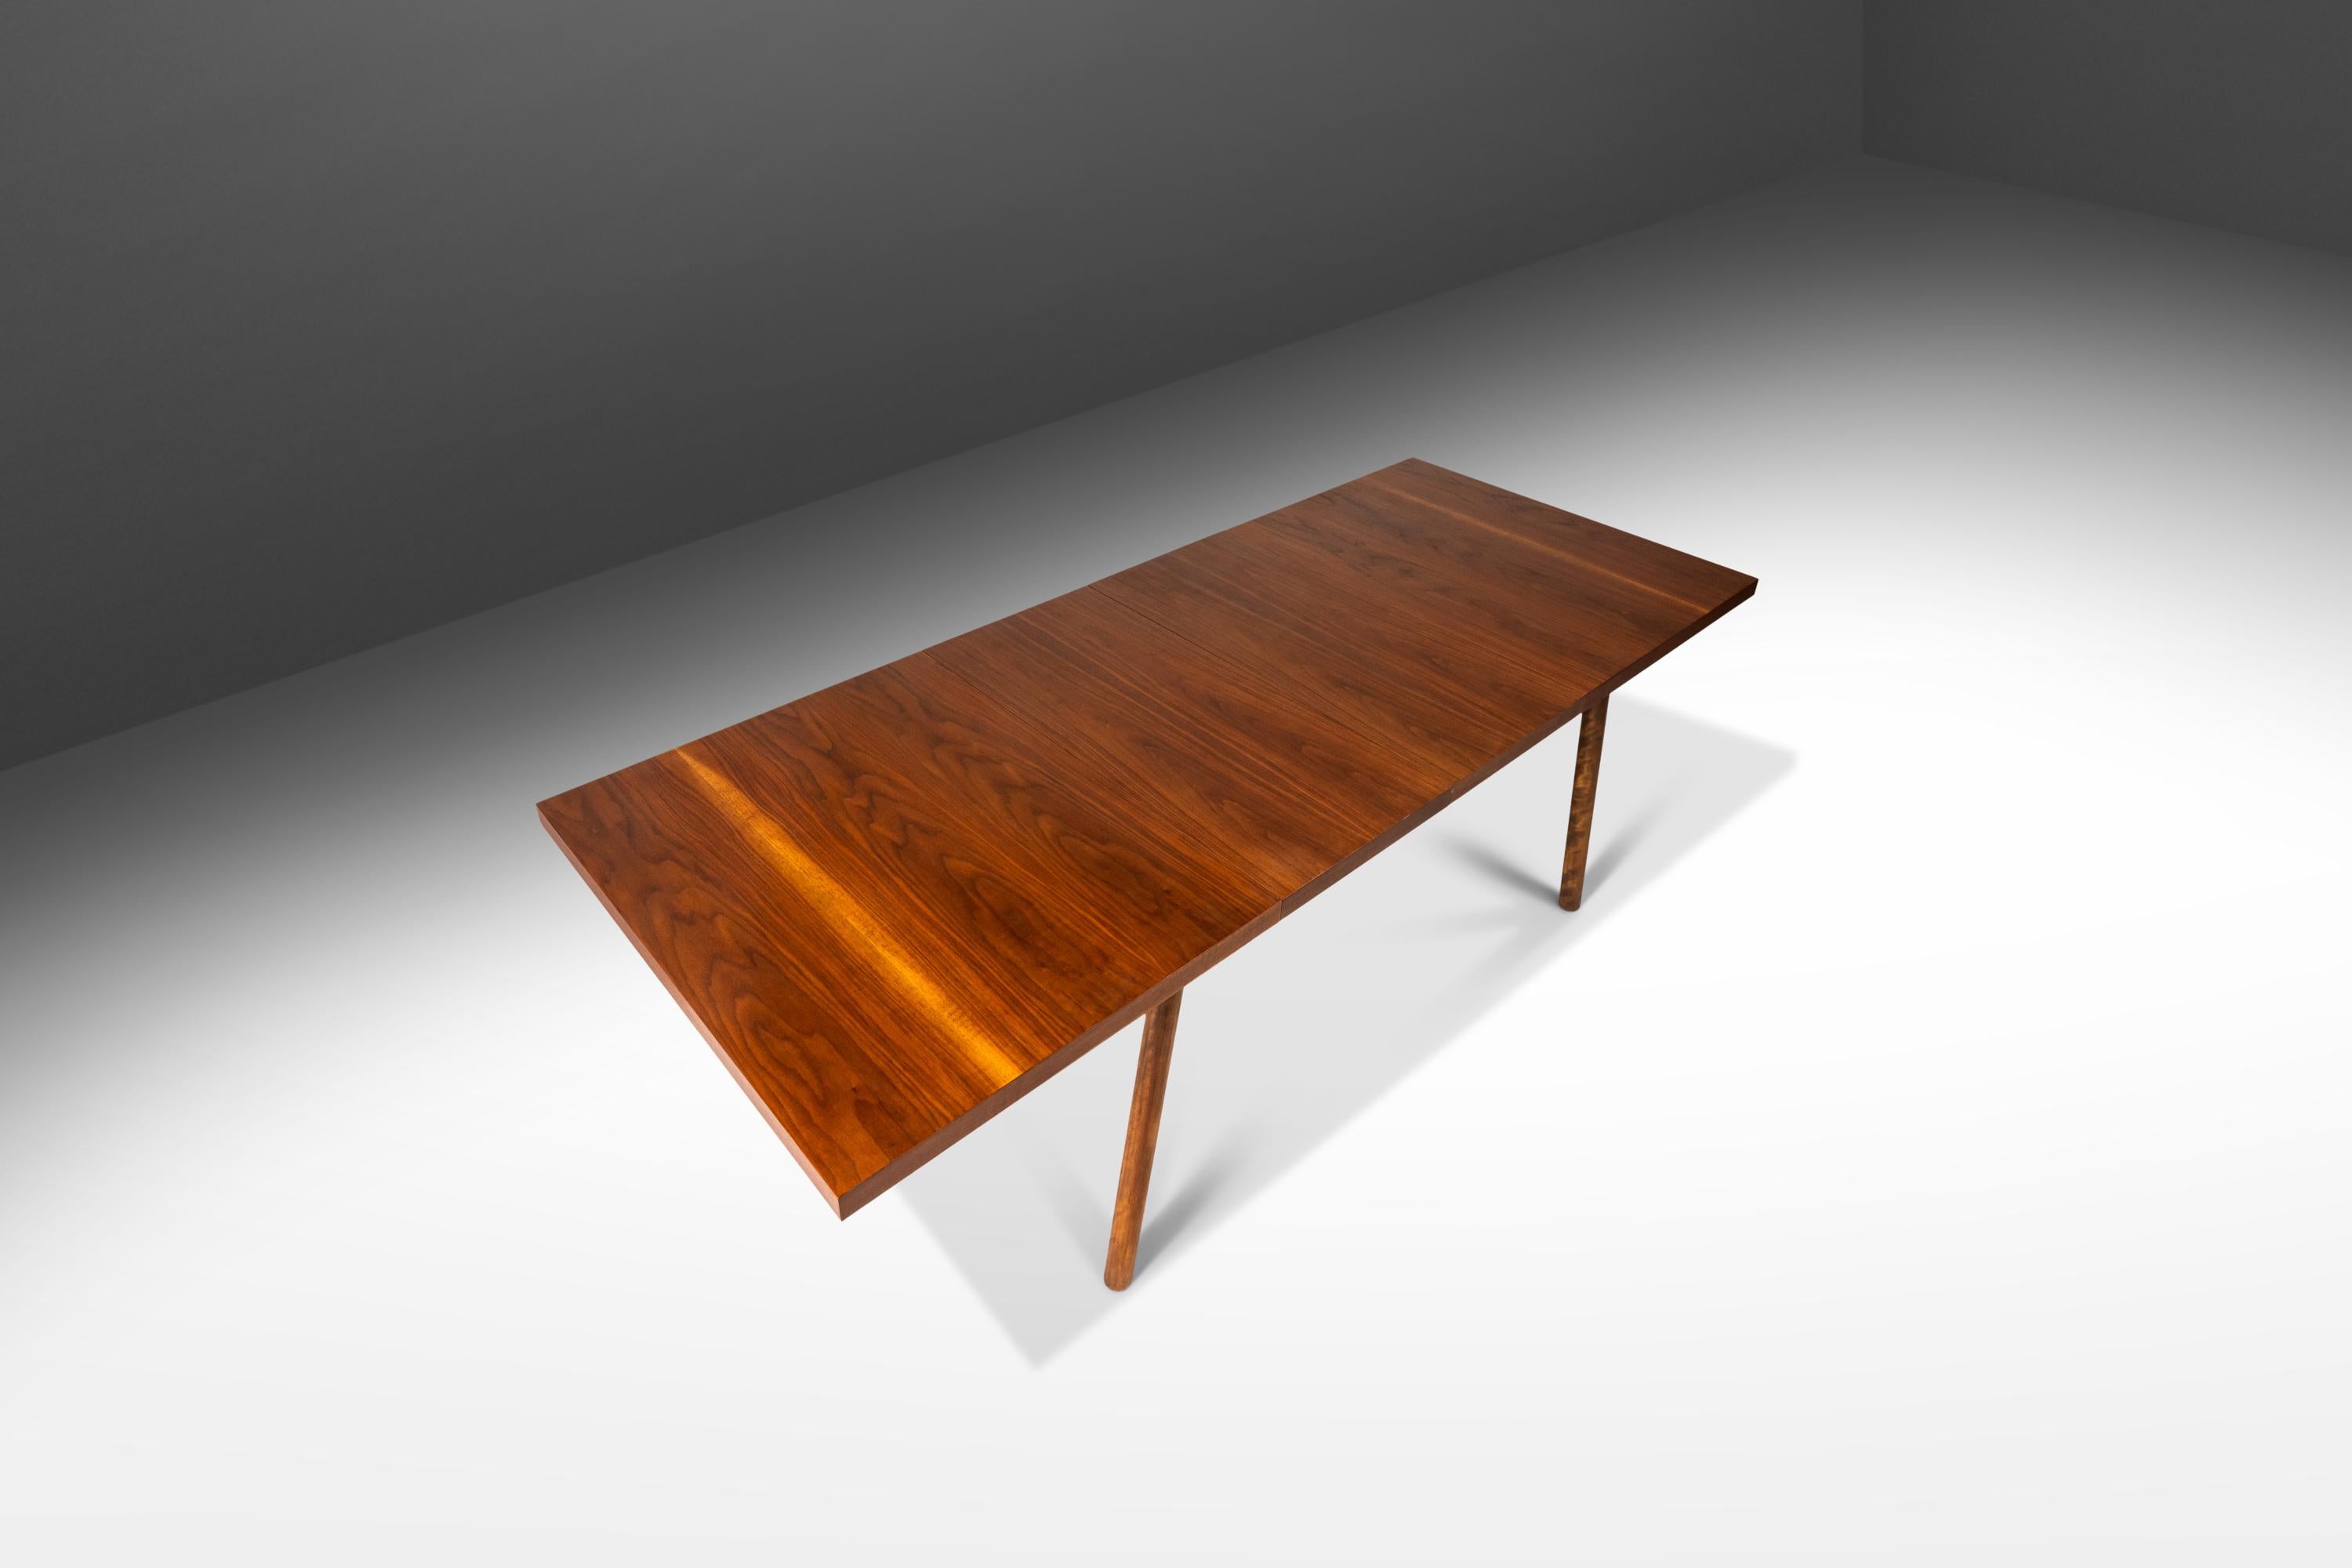 American Expansion Dining Table in Walnut by T.H. Robsjohn-Gibbings for Widdicomb, 1950's